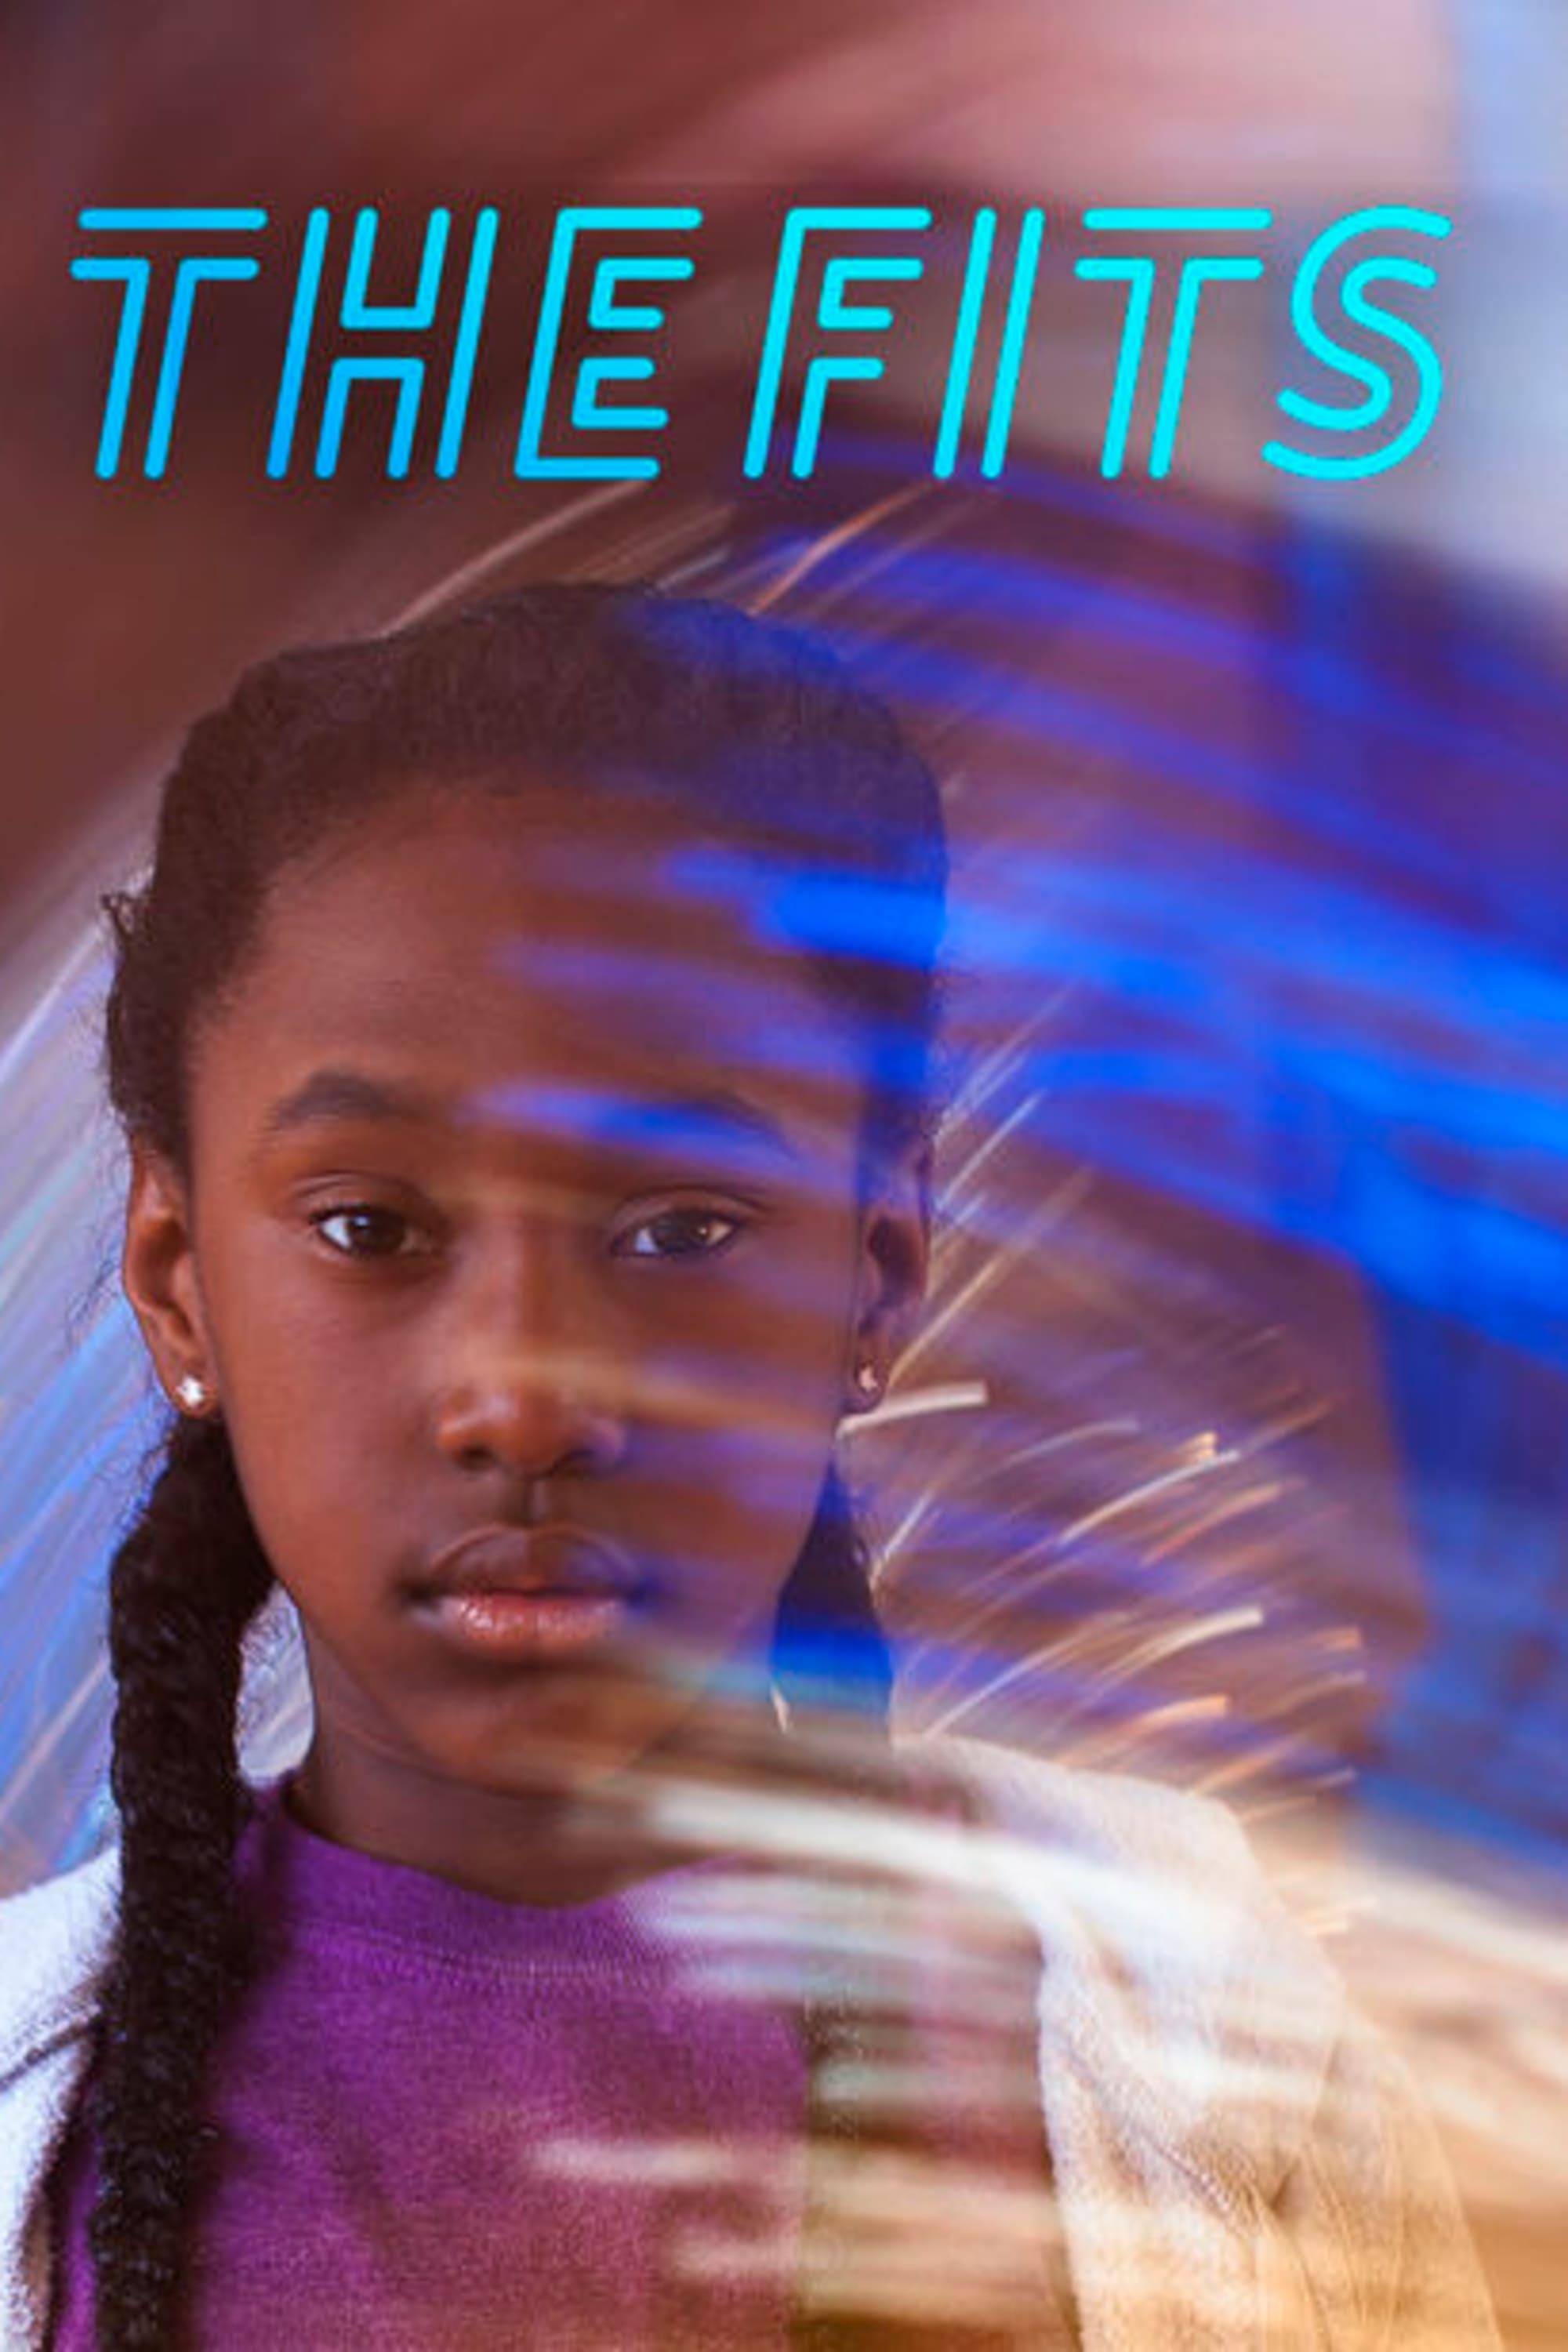 The Fits poster